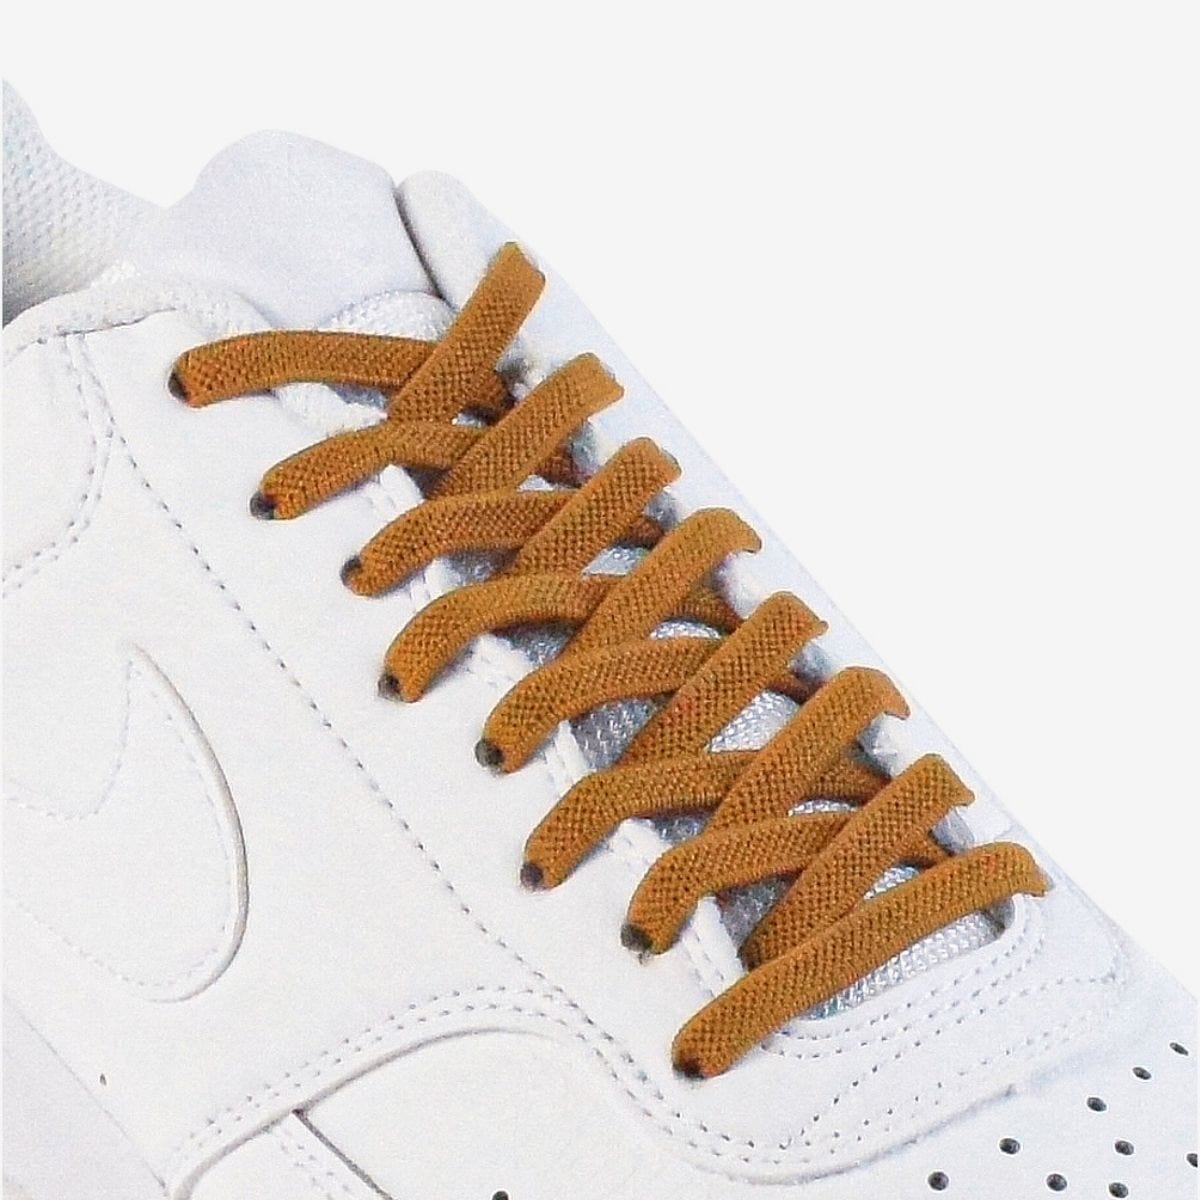 kids-no-tie-shoelaces-with-brown-laces-on-nike-white-sneakers-by-kicks-shoelaces